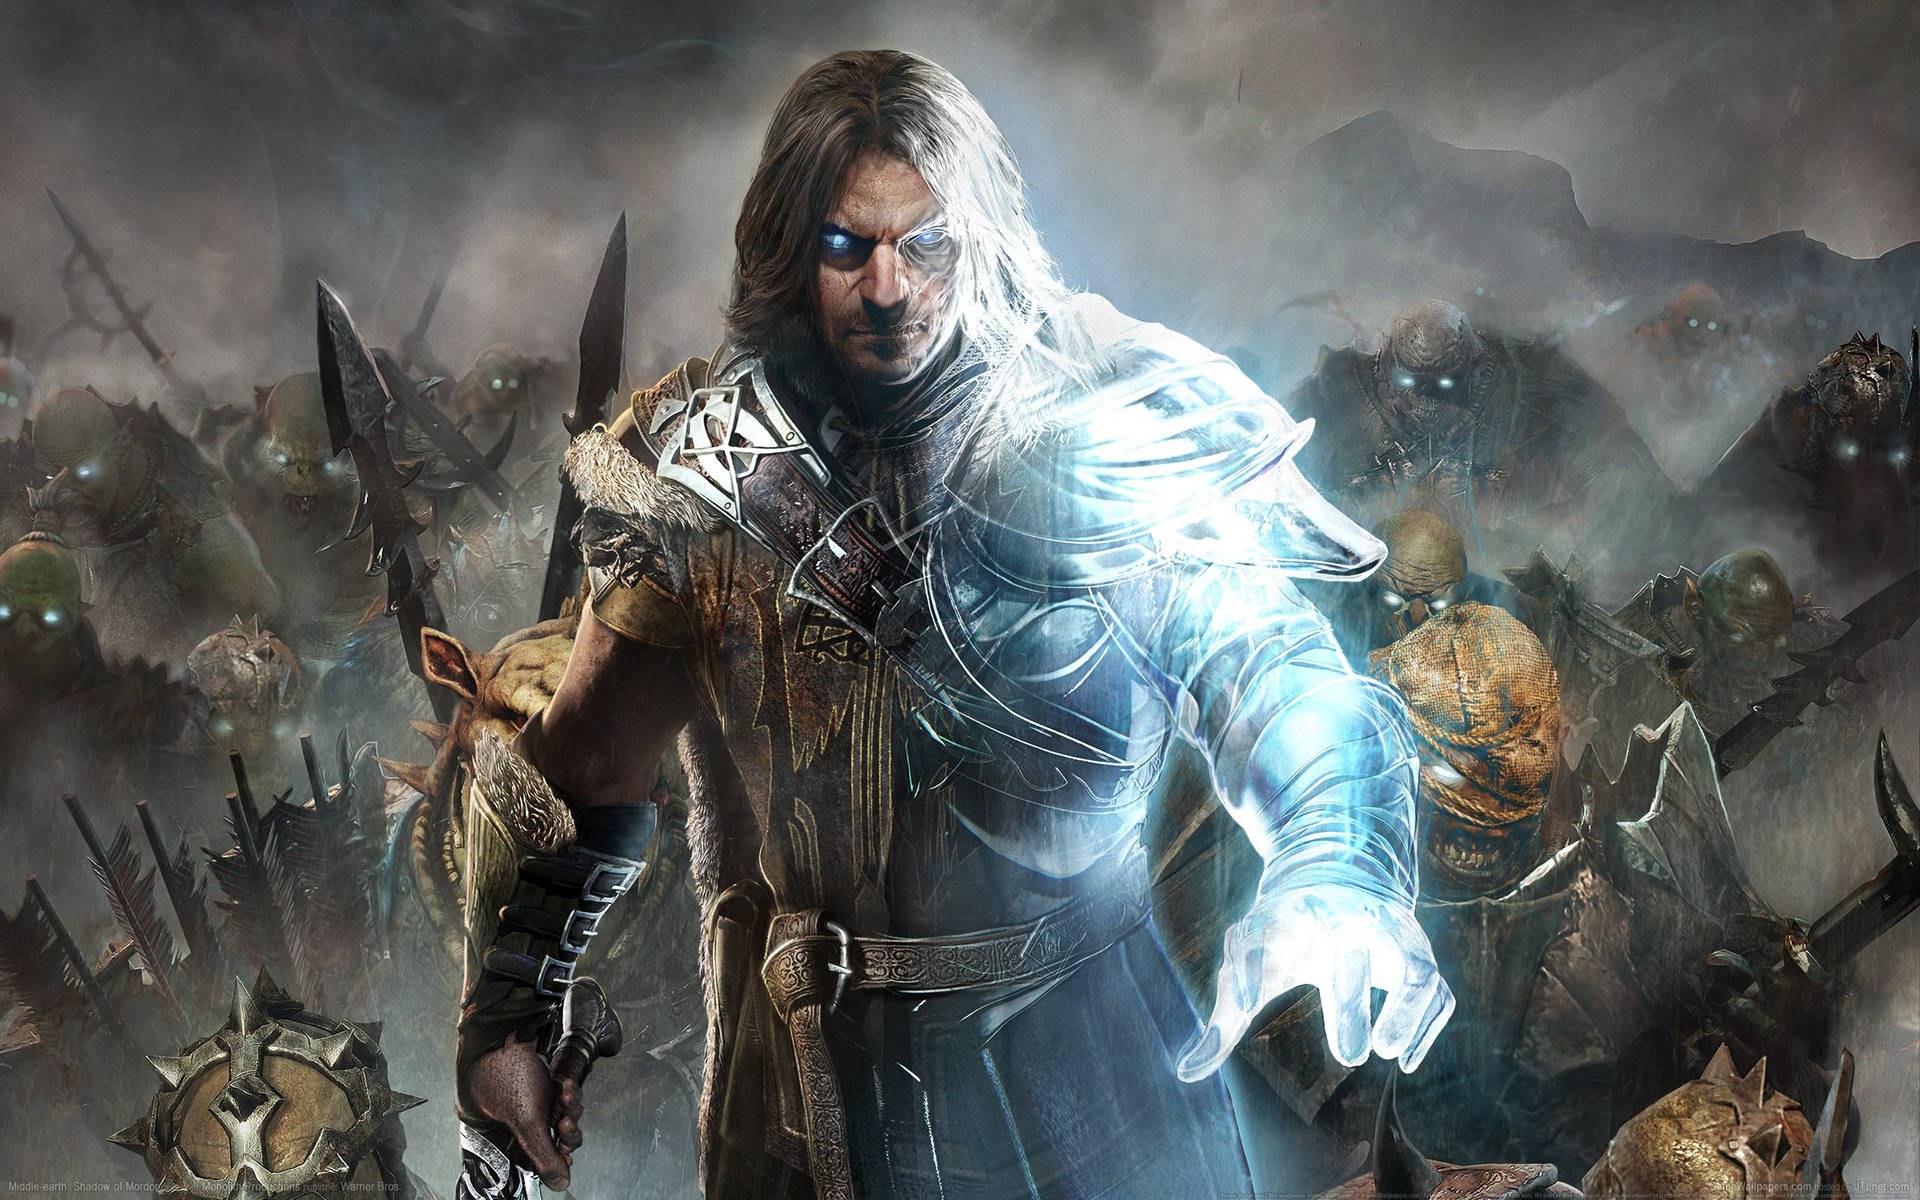 lord of the rings shadow of mordor concept art